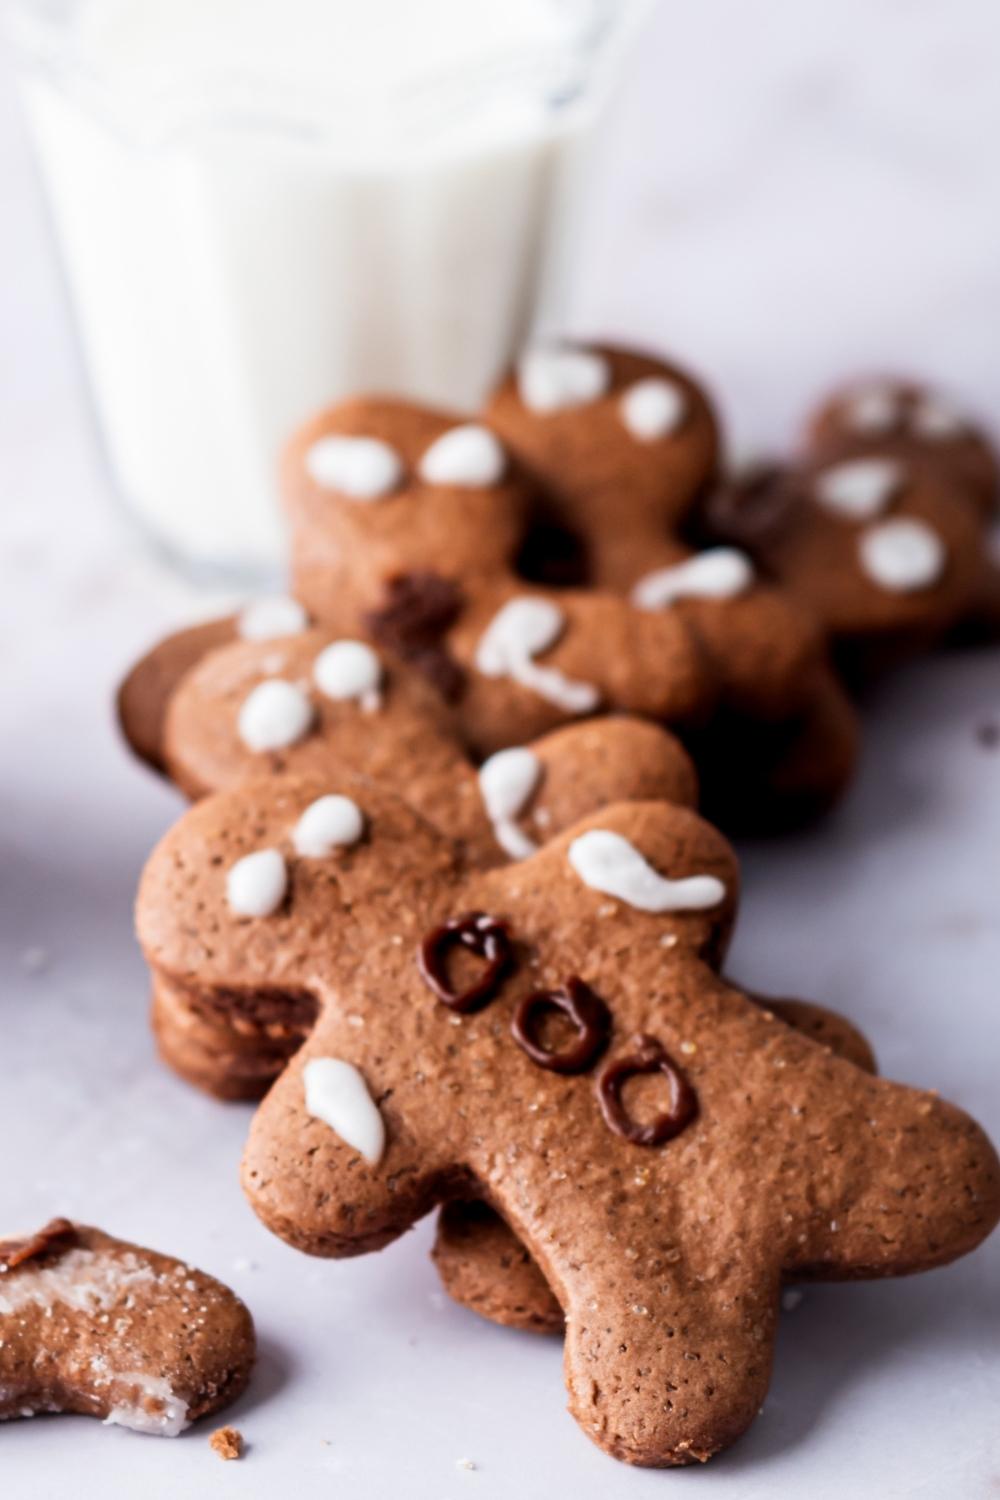 A pile of homemade gingerbread cookies fanned out on a countertop. A glass of milk sits behind them.